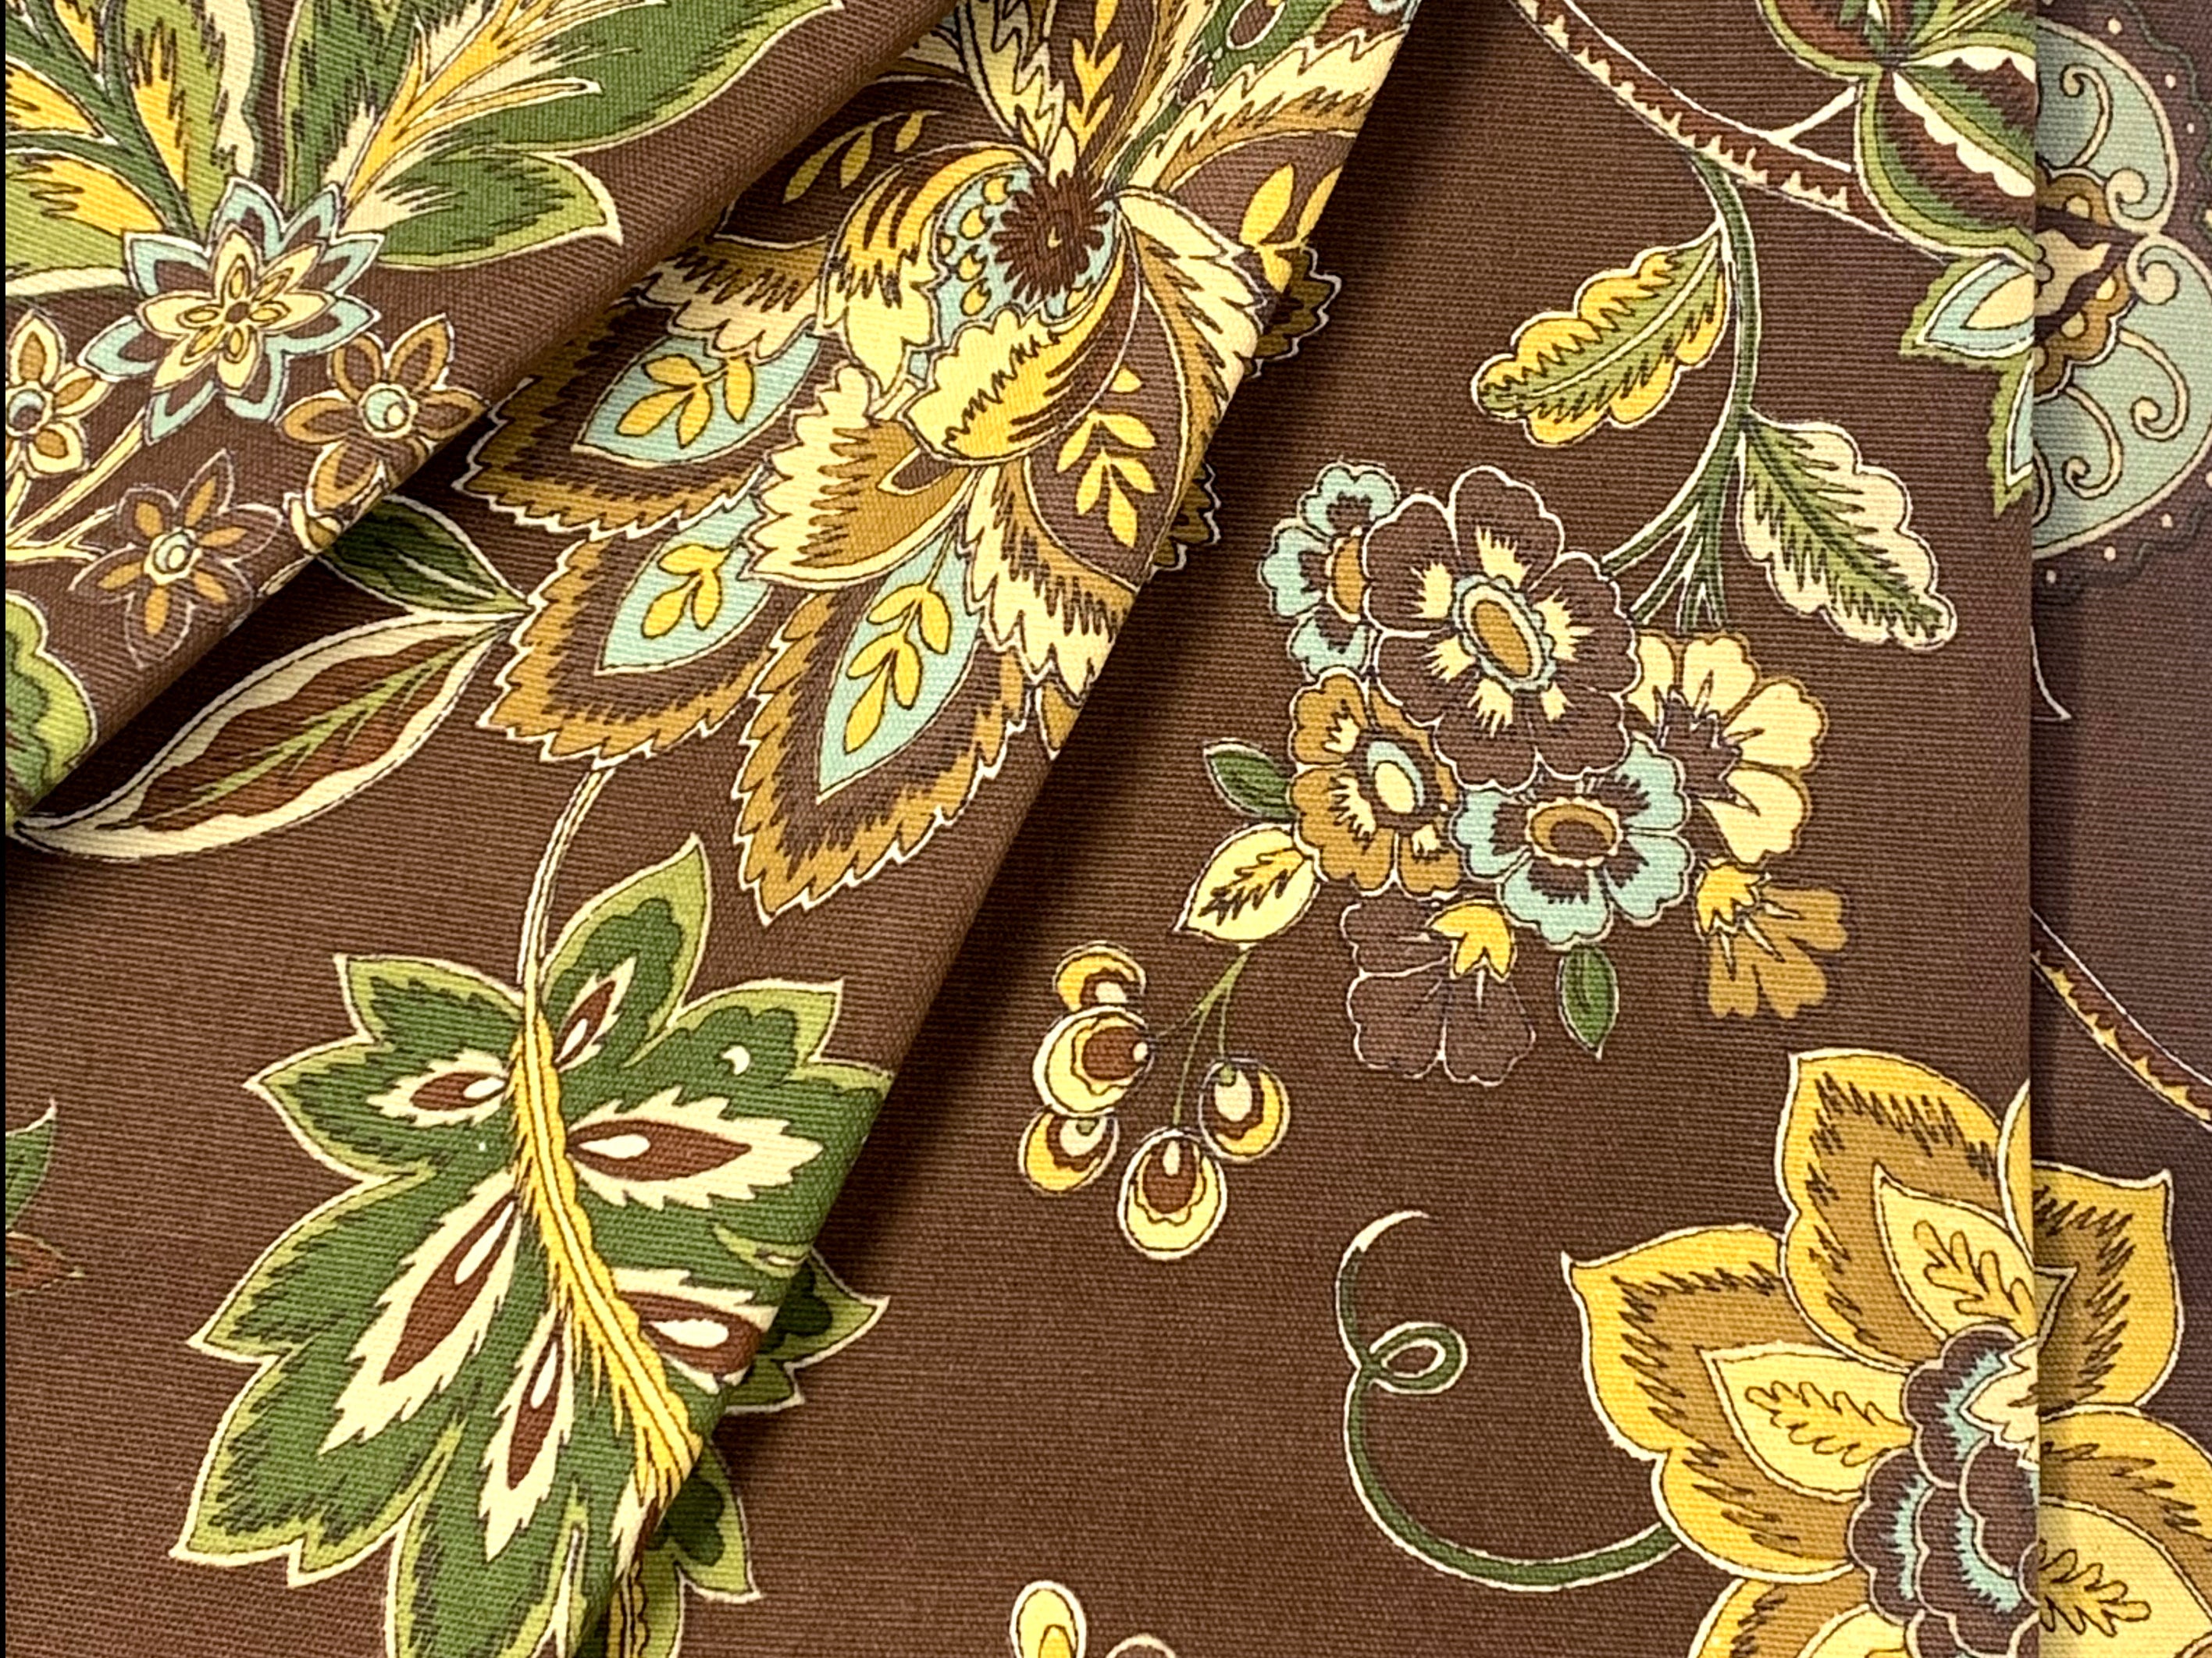 Waverly Inspirations 100% Cotton Duck 45" Width Dark Floral Cocoa Color Sewing Fabric by the Yard